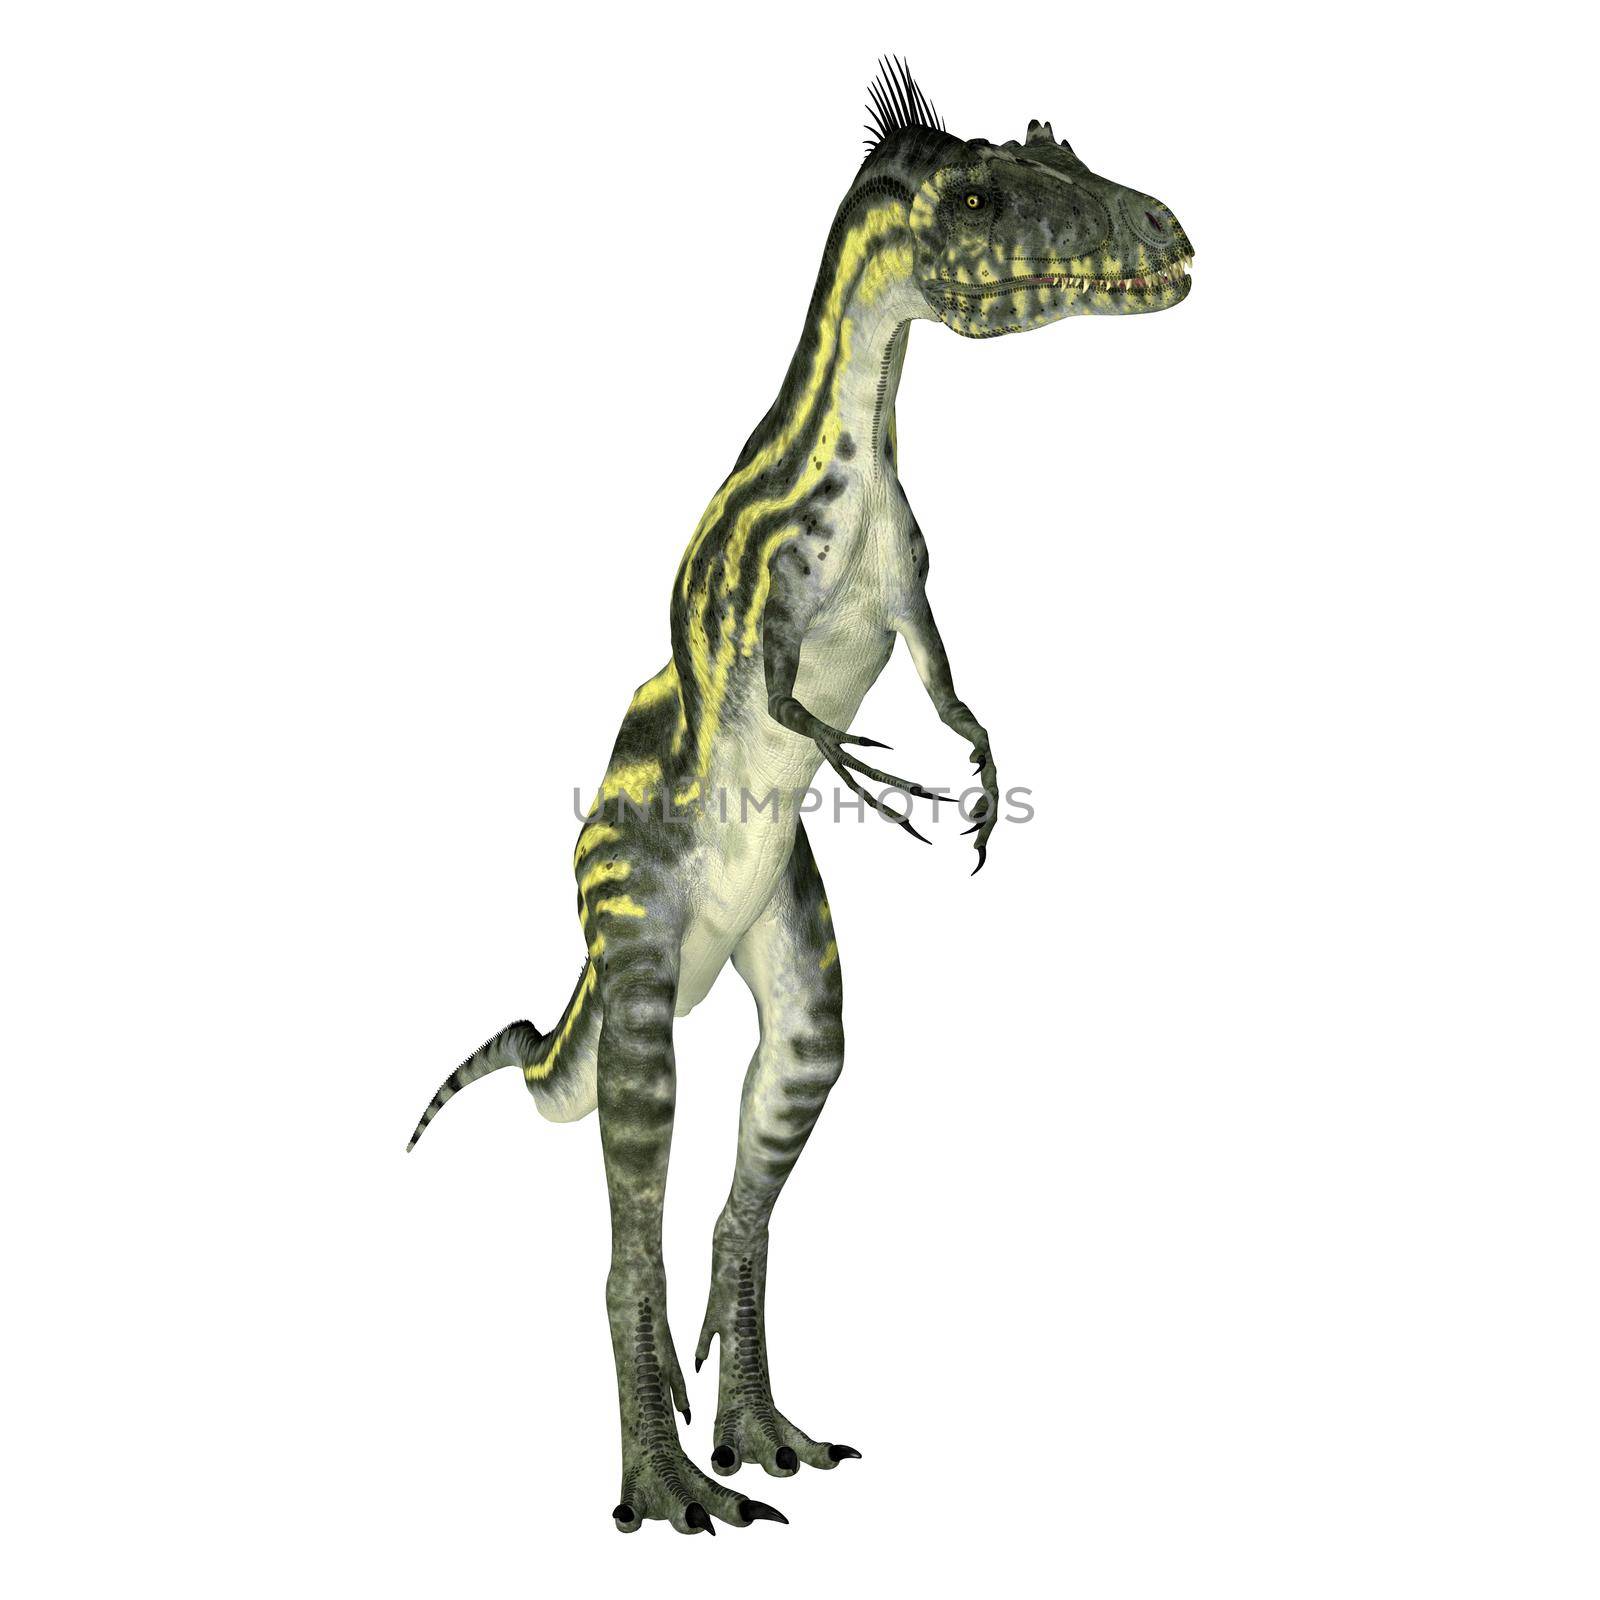 Deltadromeus was a small carnivorous theropod dinosaur that lived in Africa during the Cretaceous Period.